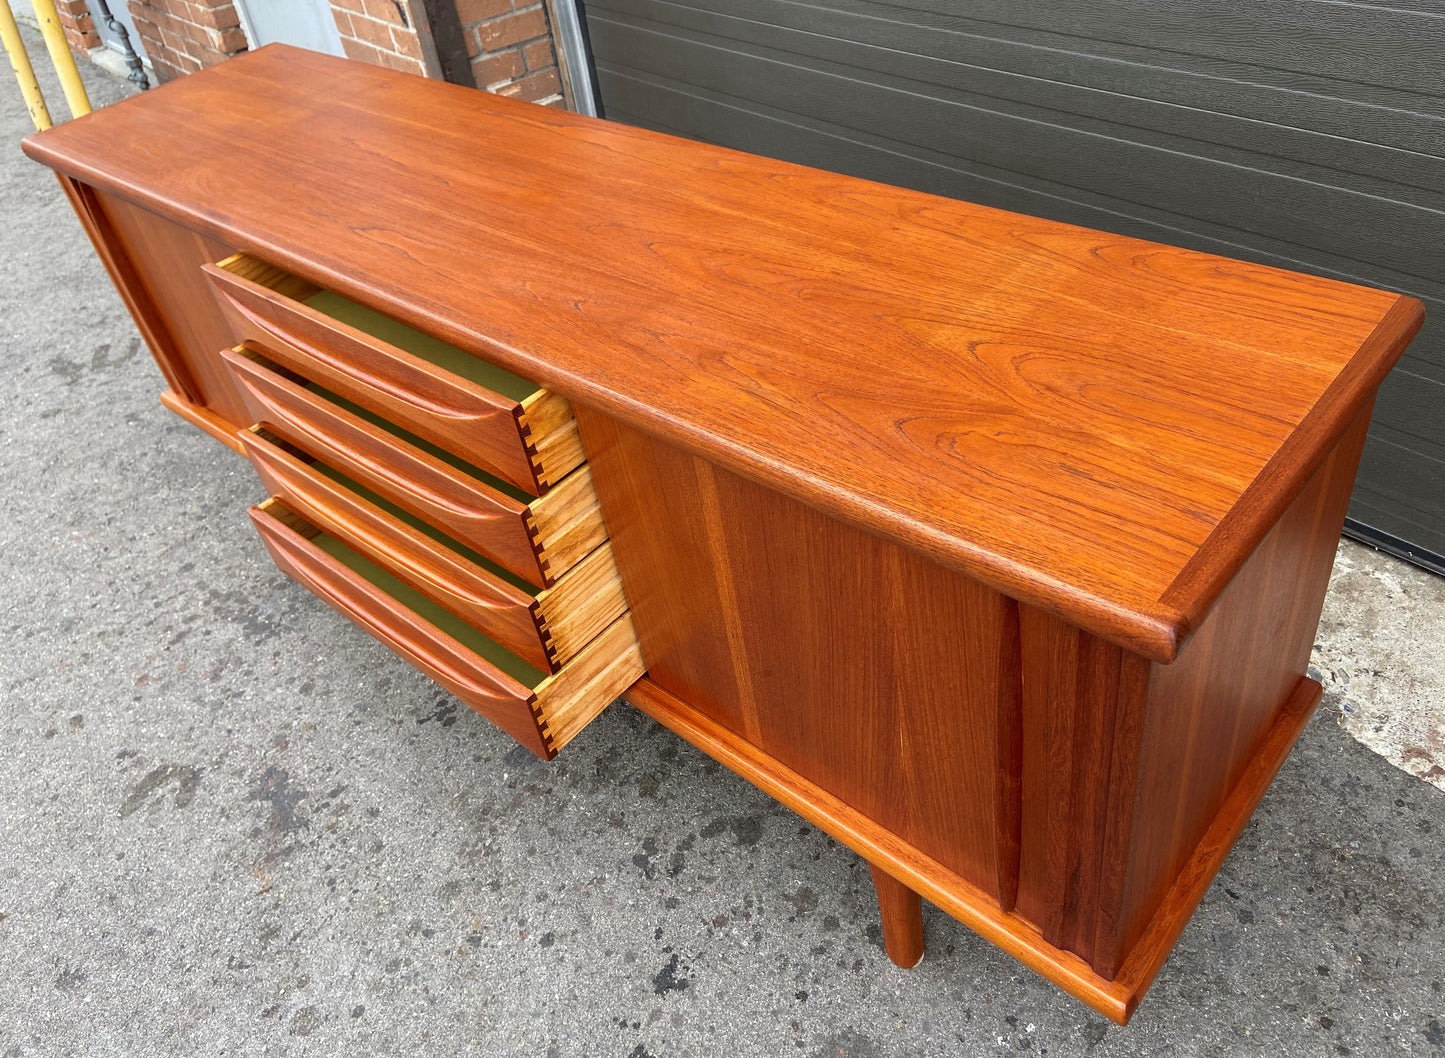 REFINISHED Mid Century Modern Teak Sideboard by Huber 77.75", Perfect